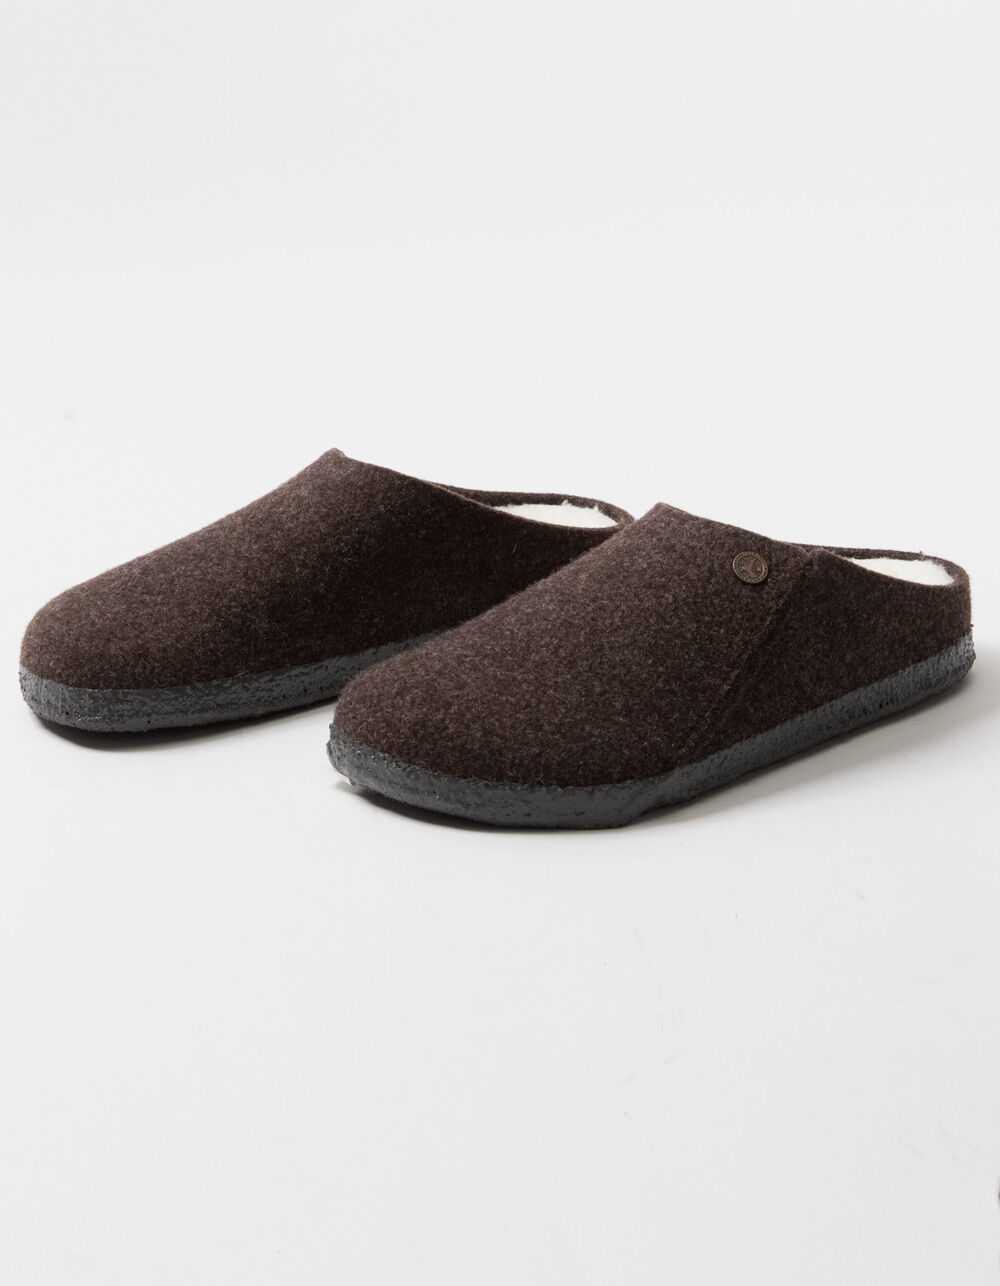 Mens Collection | Sheepskin Slippers and Boots | Draper of Glastonbury-saigonsouth.com.vn